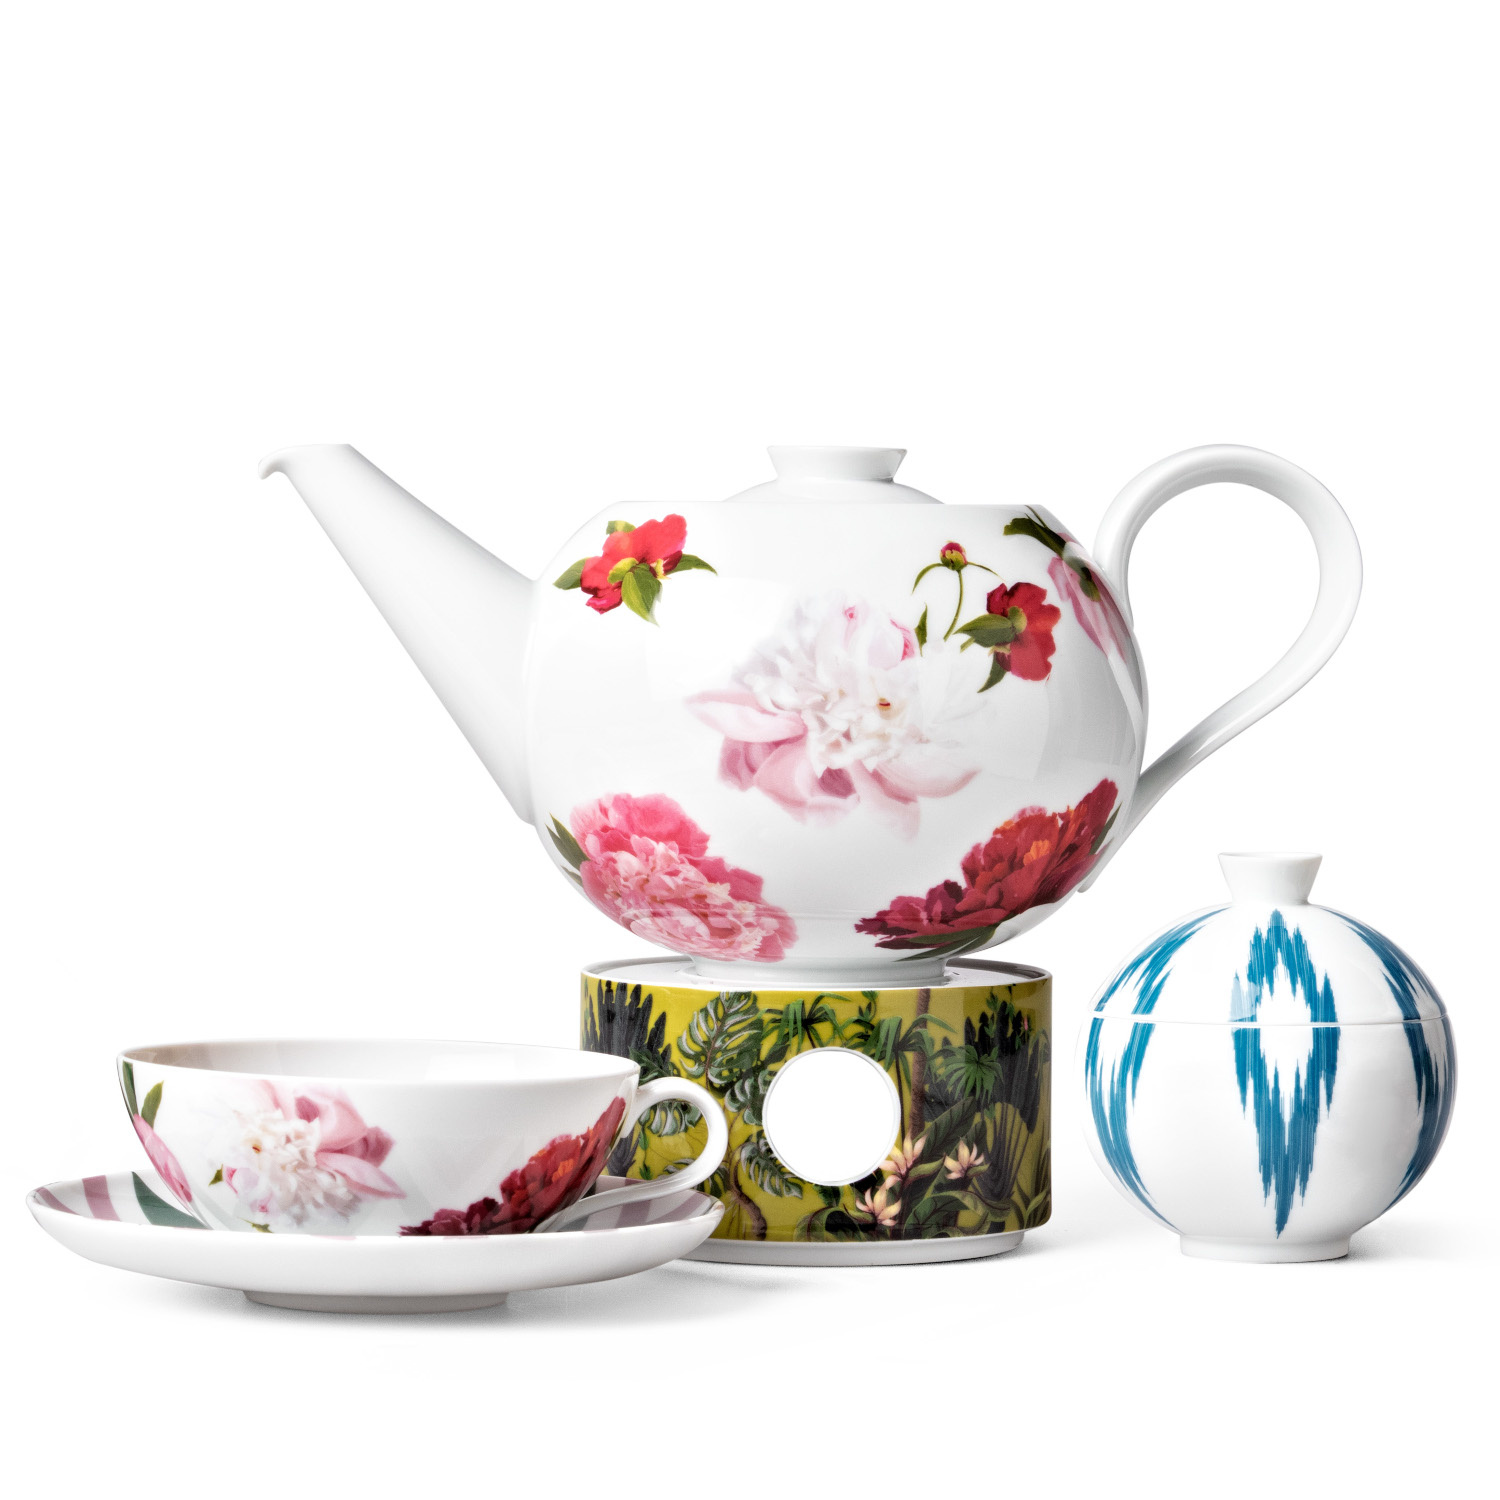 Tea Bowl Sieger by Furstenberg Collection My China! Paraiso